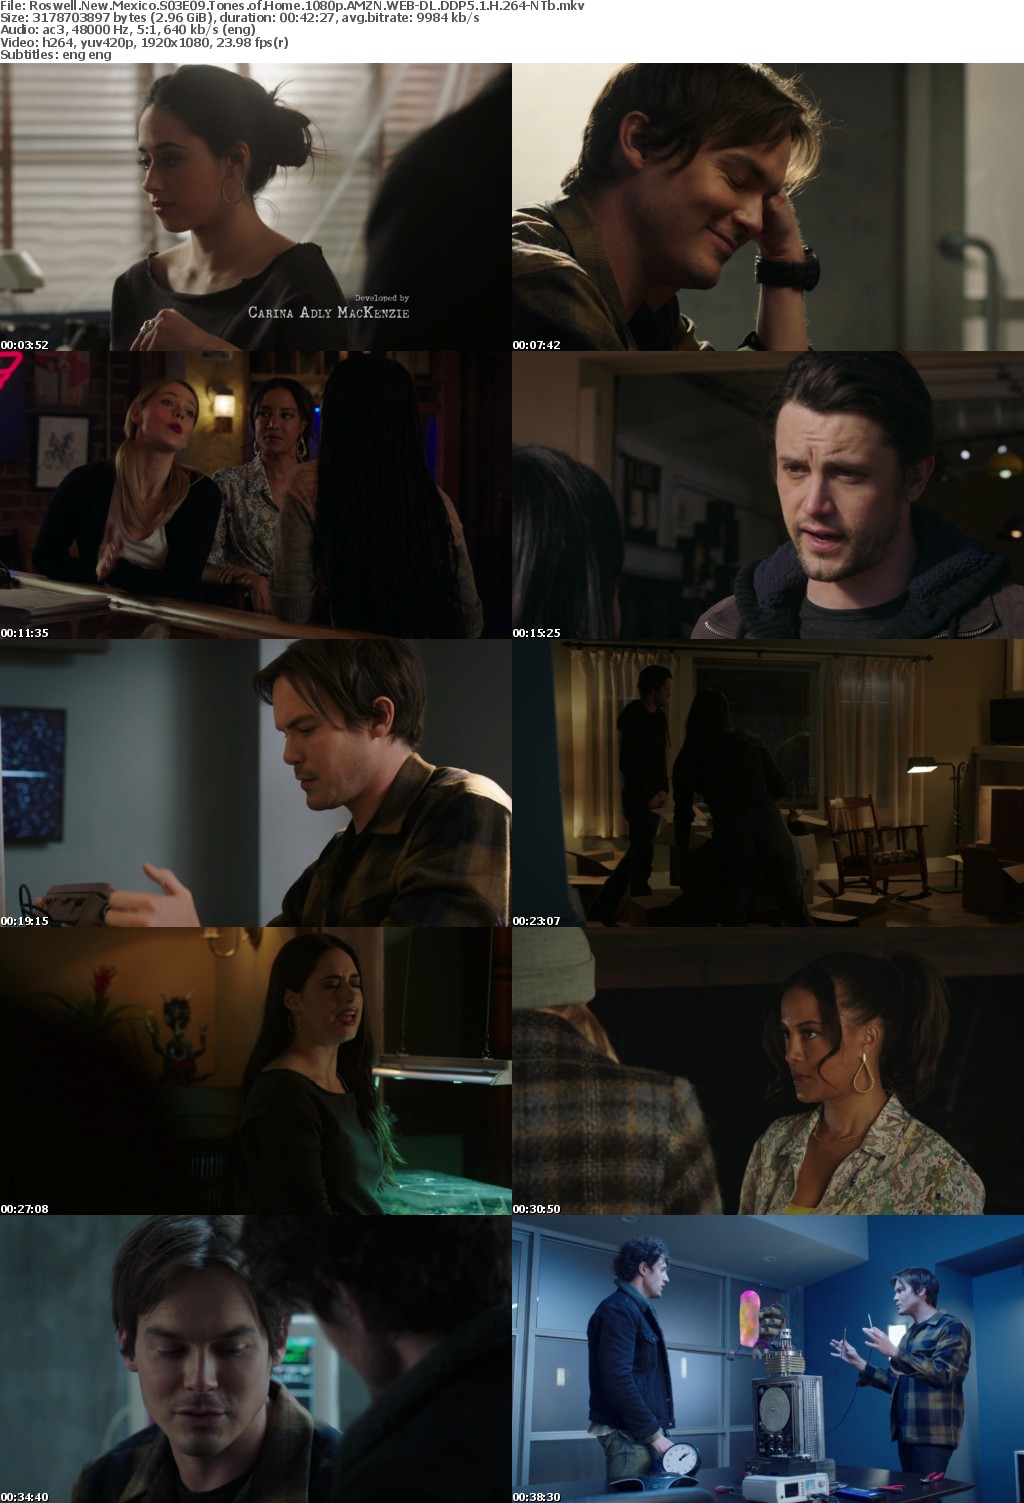 Roswell New Mexico S03E09 Tones of Home 1080p AMZN WEBRip DDP5 1 x264-NTb